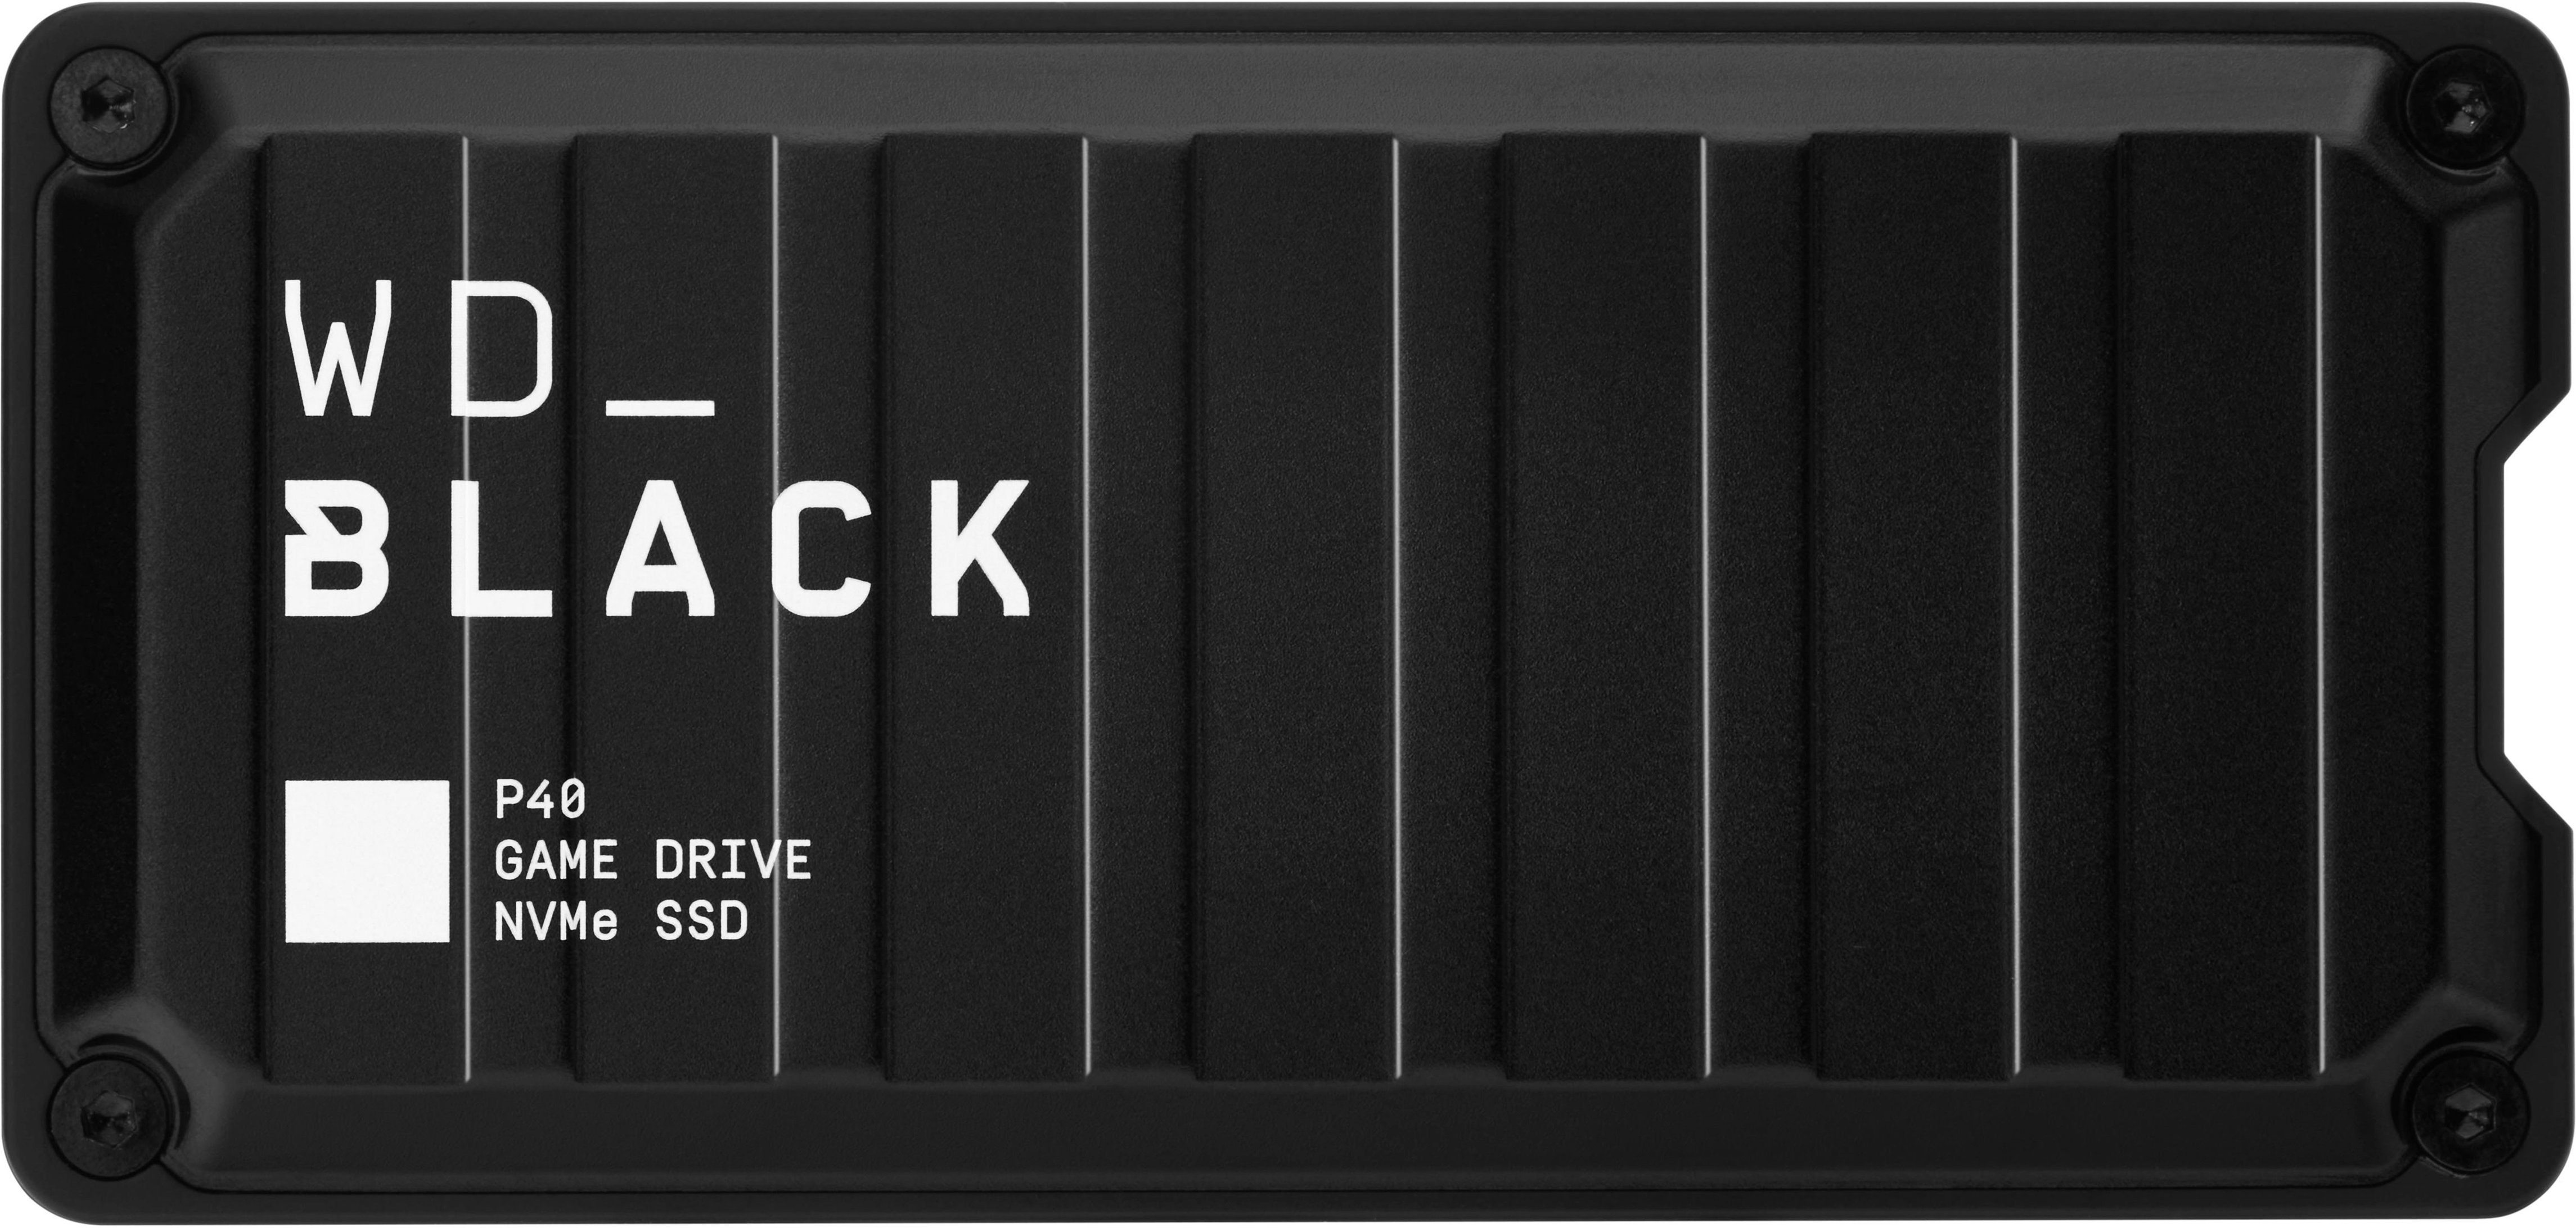 WD BLACK P40 Game Drive for PC, PS4, PS5 and Xbox 2TB External USB